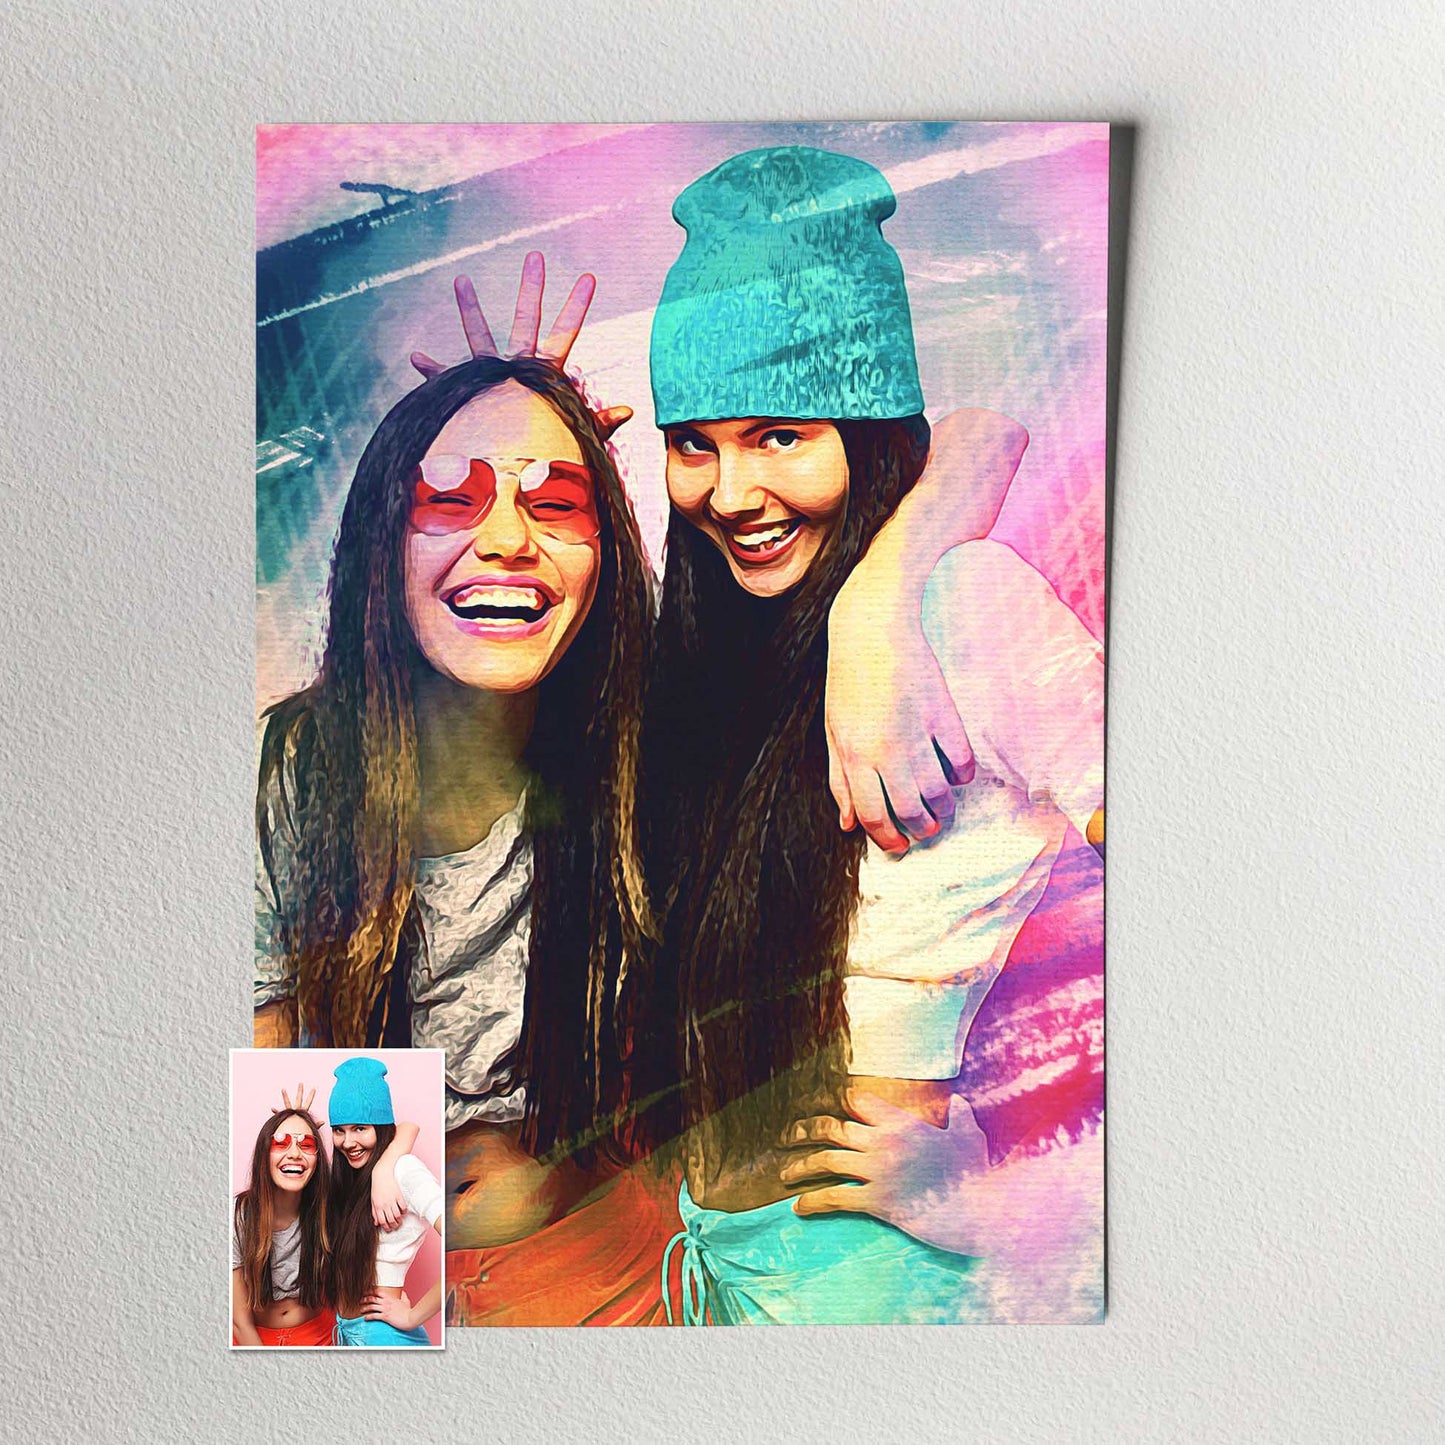 Add a touch of elegance to your walls with a Personalised Brush Painting Print, featuring your photo transformed into a stunning watercolor style artwork with a mesmerizing brushstroke effect. The captivating purple, pink, and blue hues 